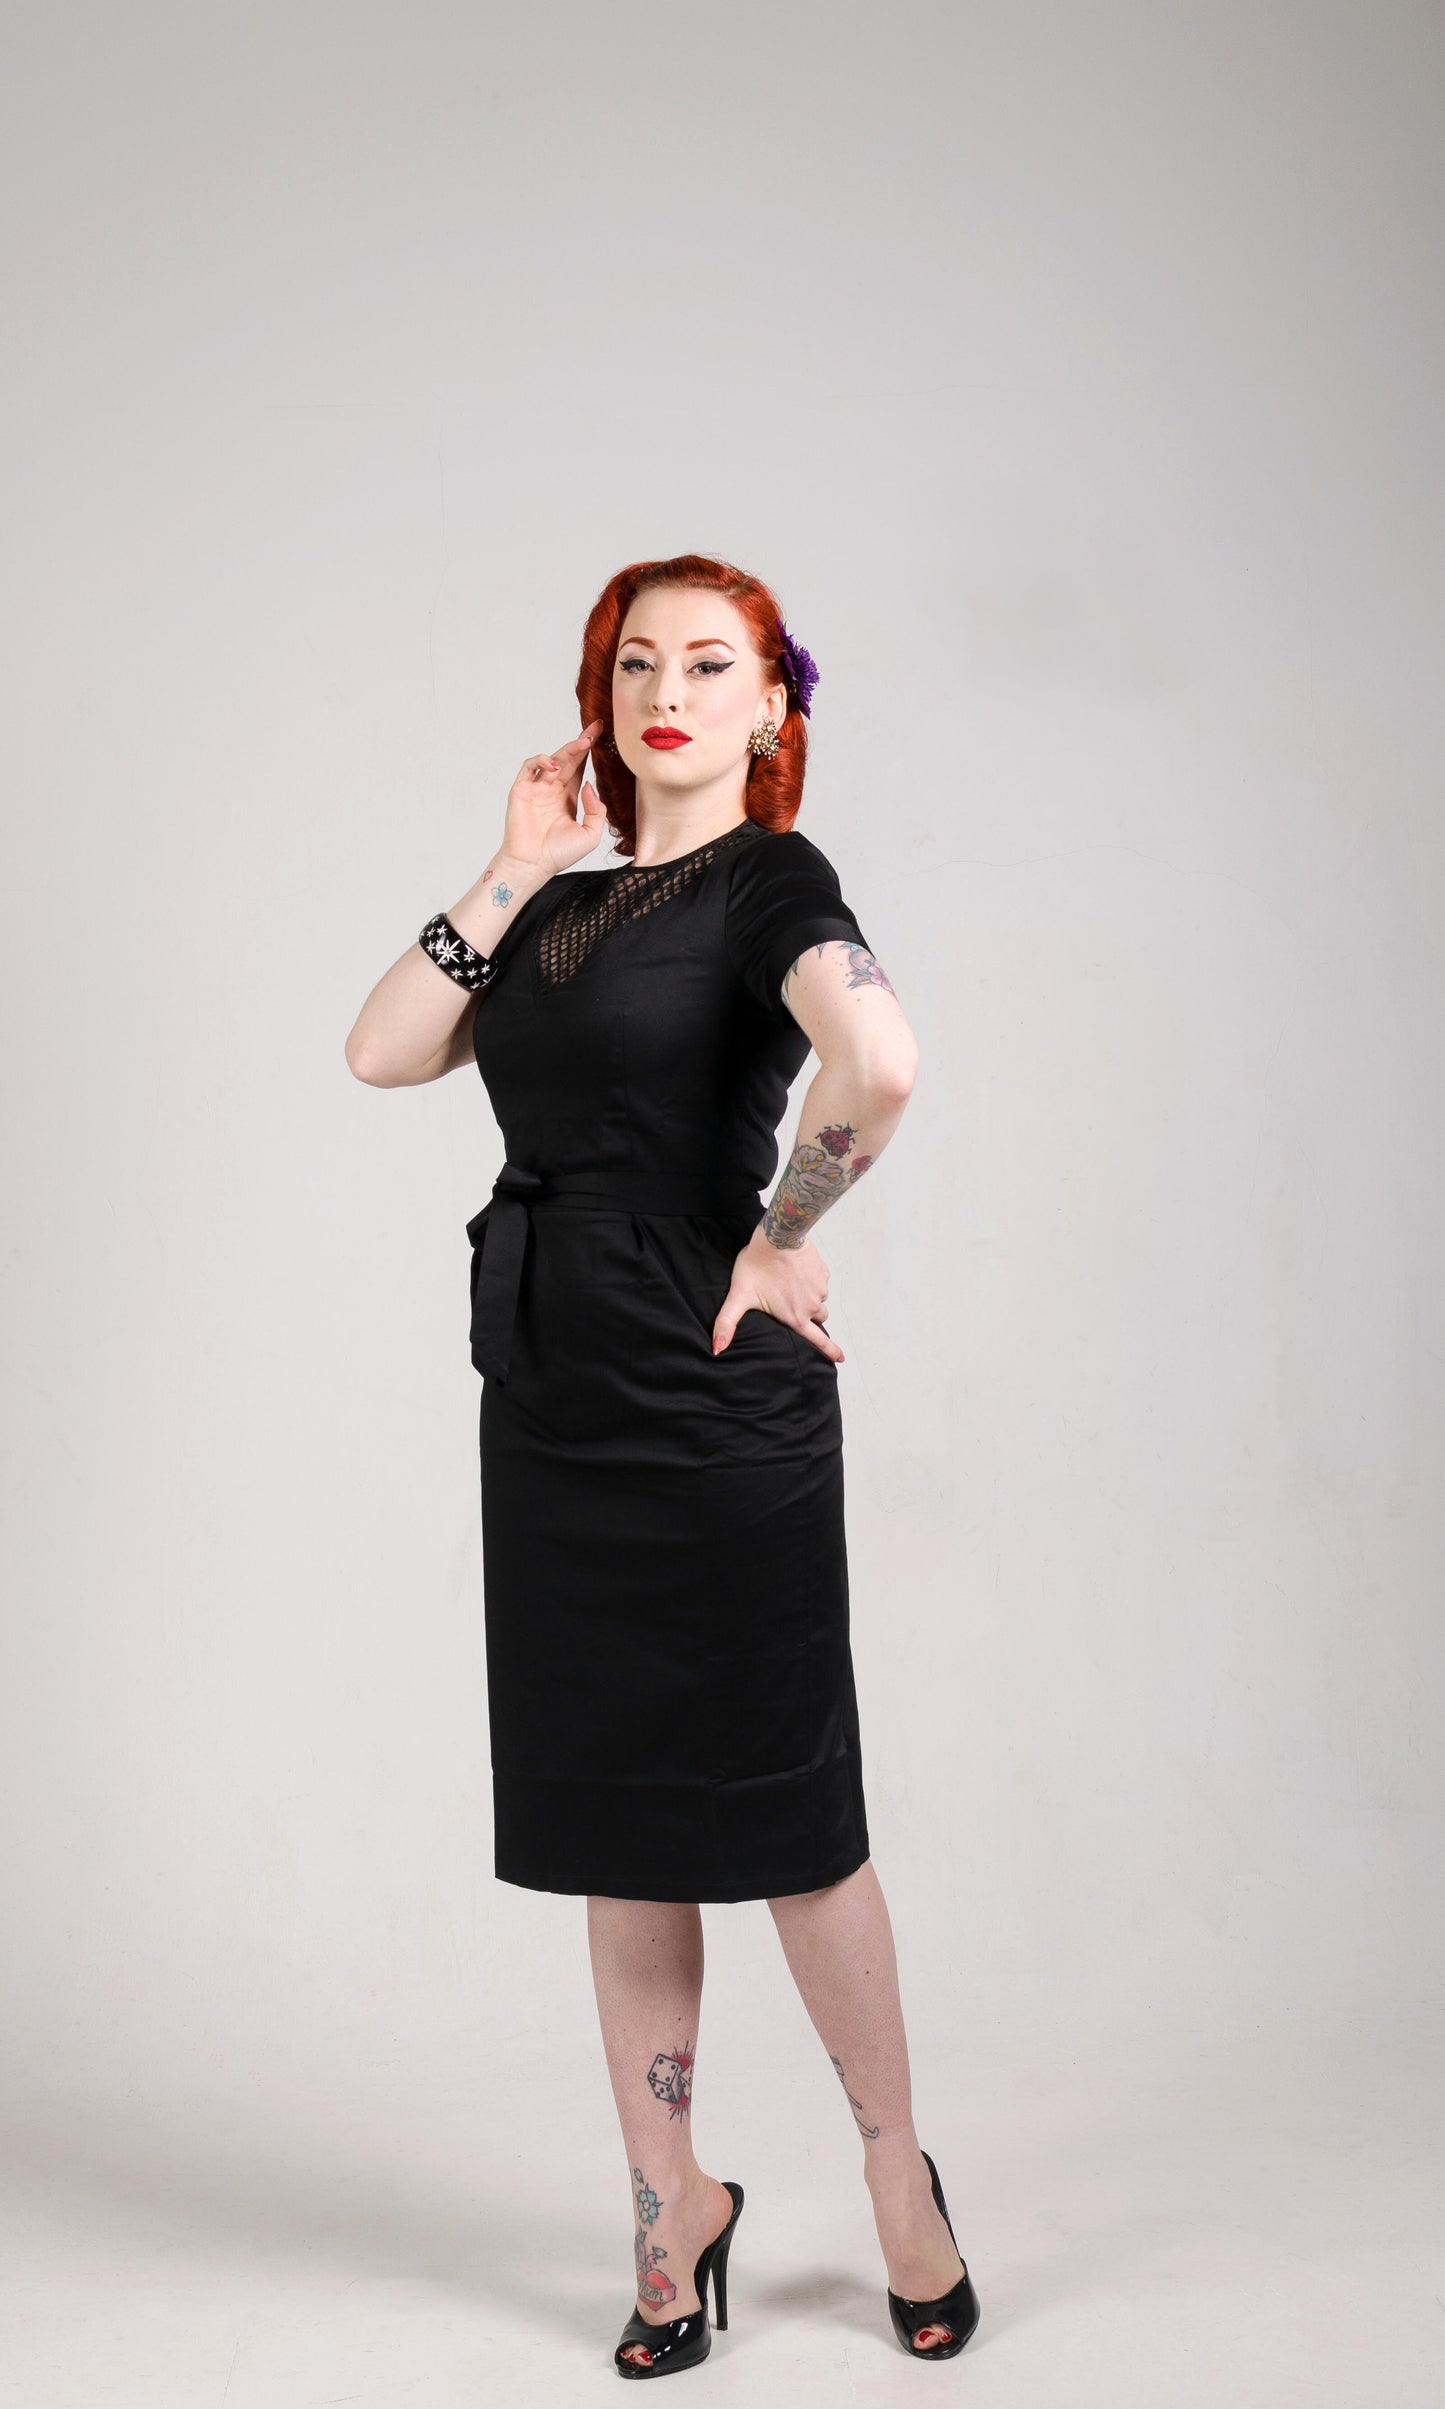 Cherie Vintage 1950s inspired black wiggle cocktail dress with mesh insert and belt XS to 3XL